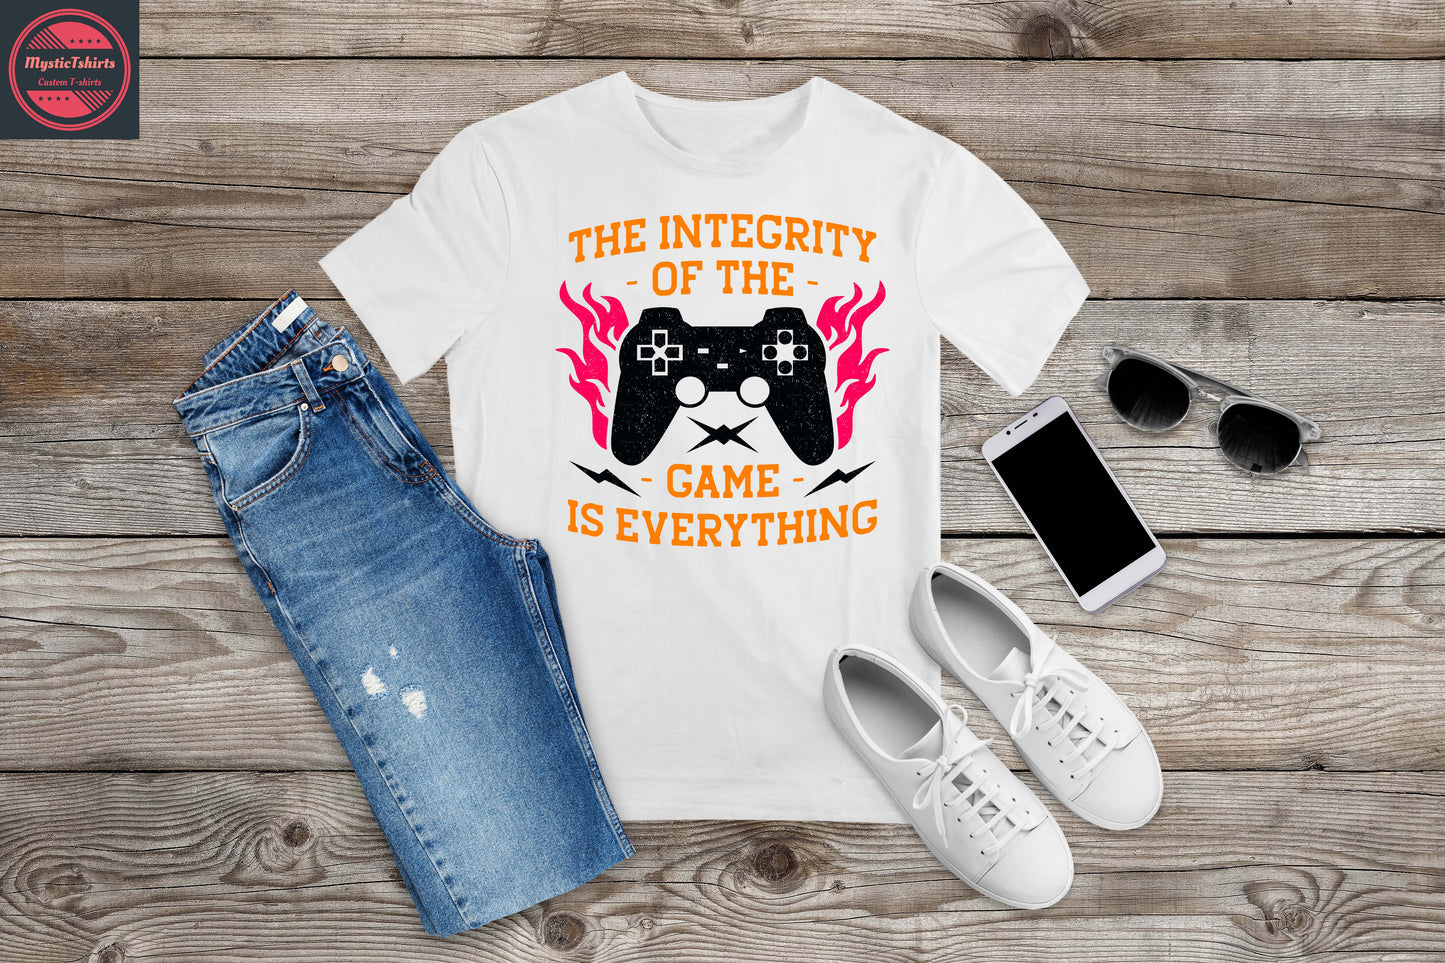 451. THE INTEGRITY OF THE GAME IS EVERYTHING, Custom Made Shirt, Personalized T-Shirt, Custom Text, Make Your Own Shirt, Custom Tee